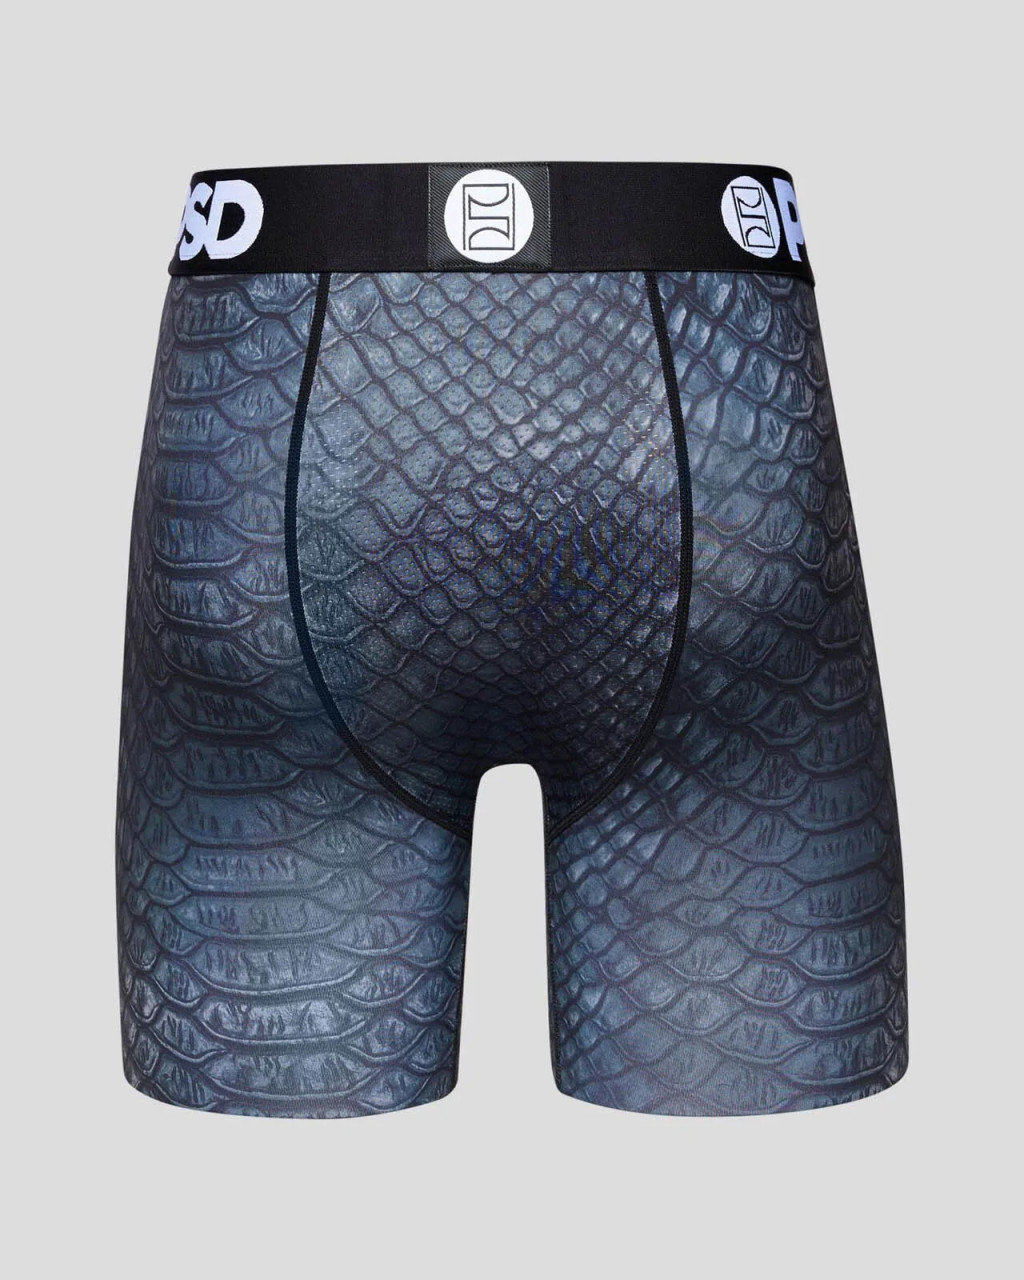  PSD Men's Space Snake Athletic Boxer Brief XL with Hanger :  Clothing, Shoes & Jewelry